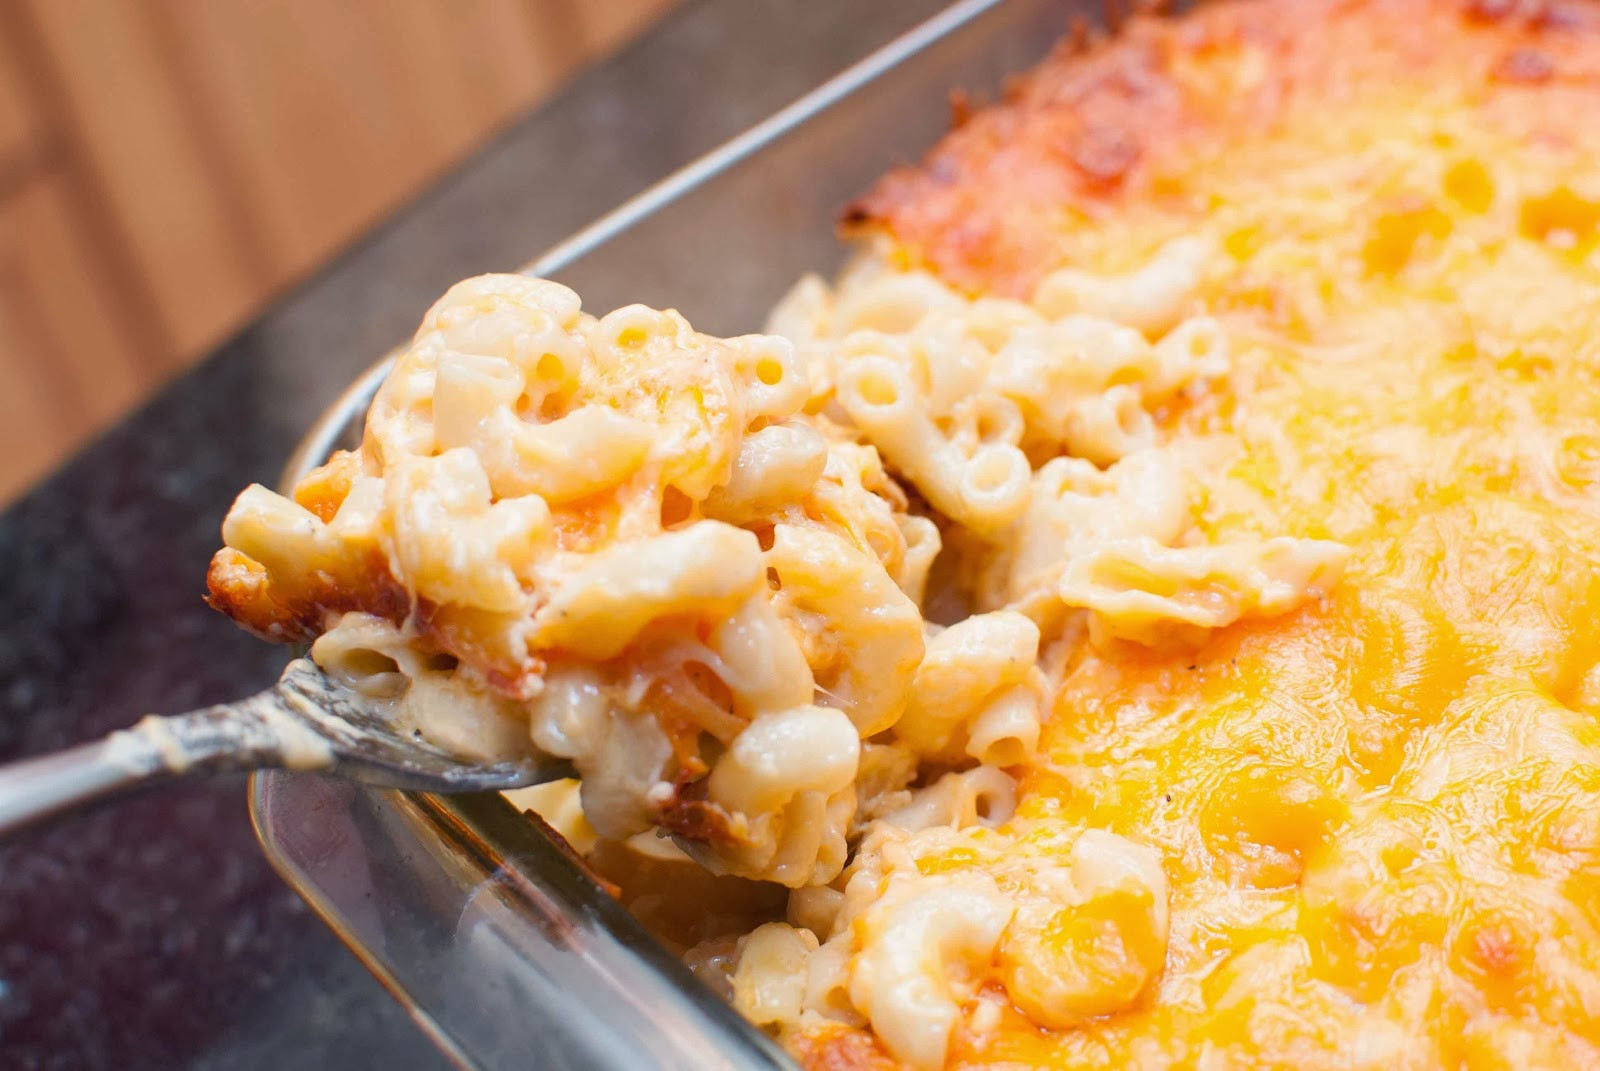 Gluten Free Baked Macaroni And Cheese
 Baked Gluten Free Macaroni And Cheese Dairy Free